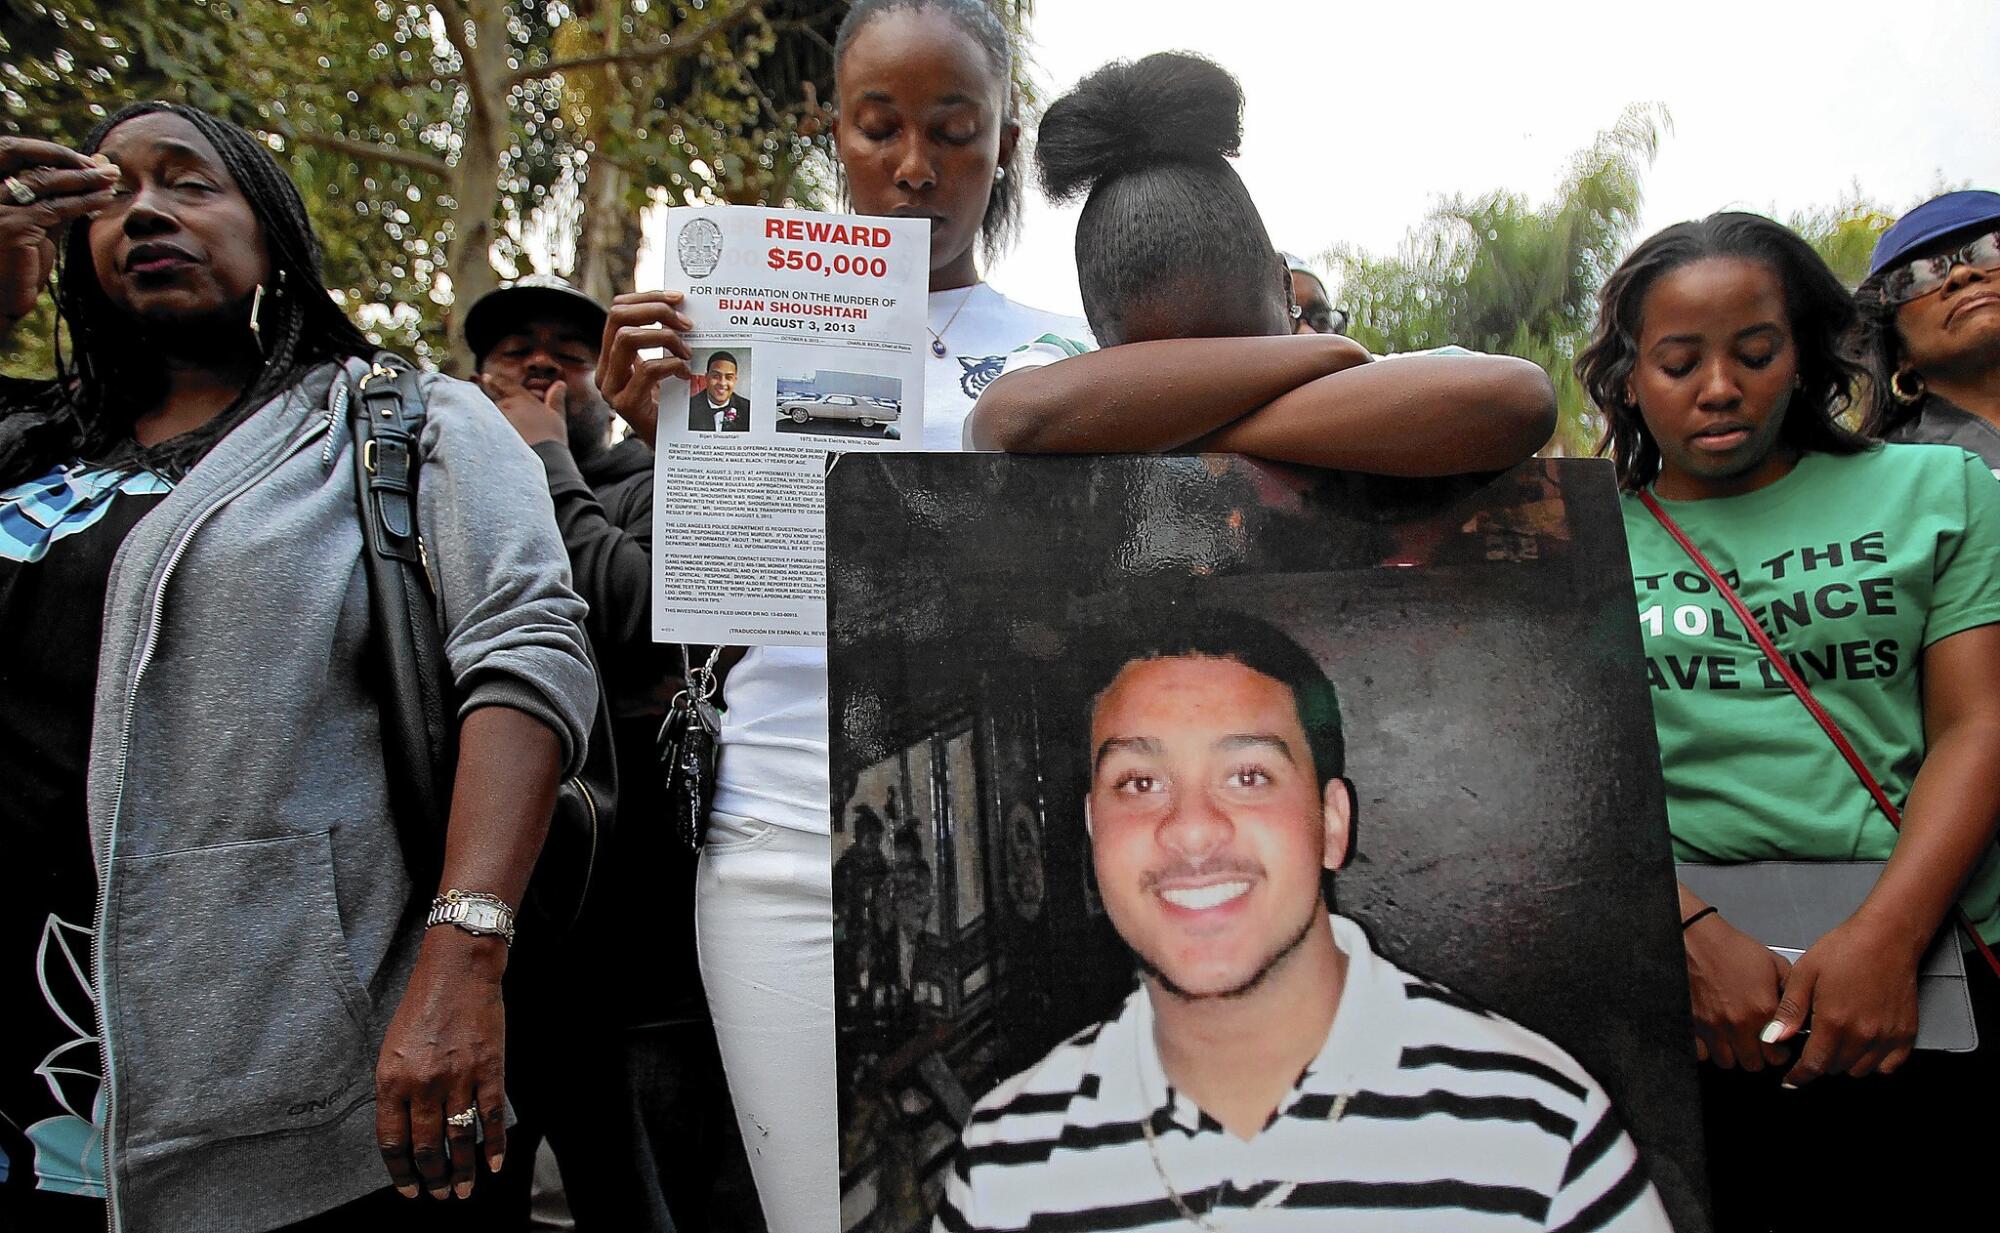 Mourners carry a photo of a man who was killed